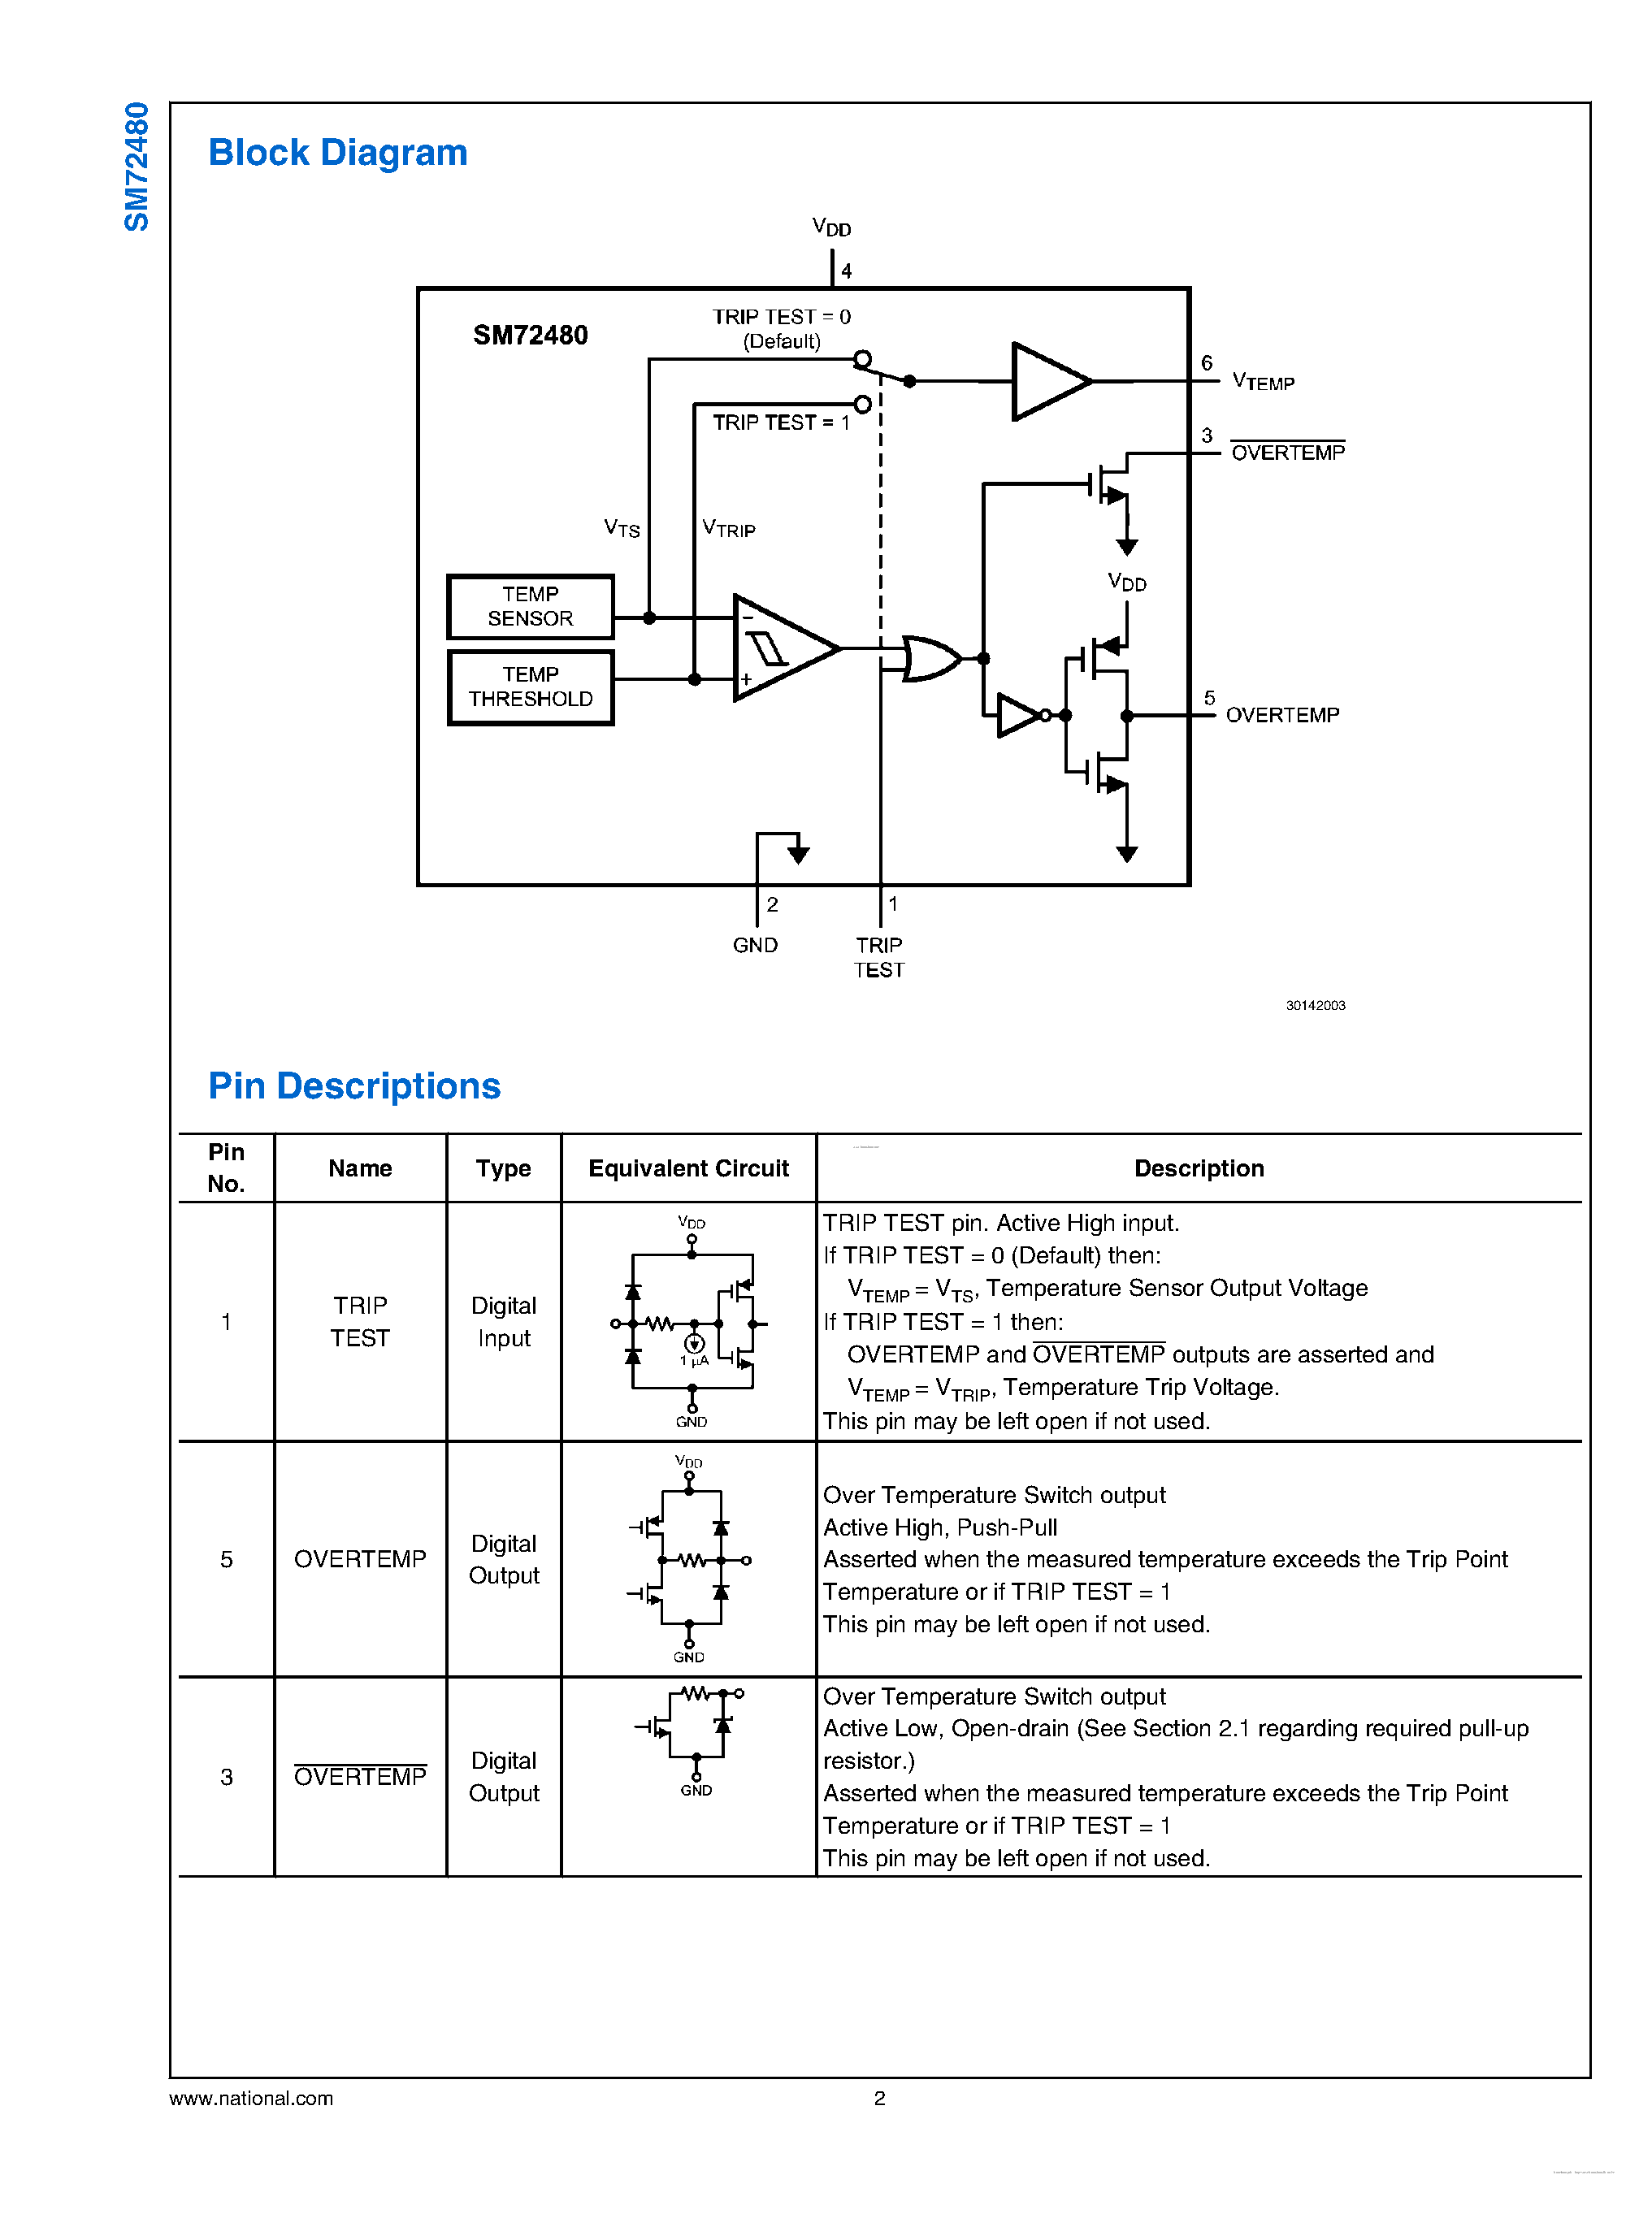 Datasheet SM72480 - LLP-6 Factory Preset Temperature Switch and Temperature Sensor page 2